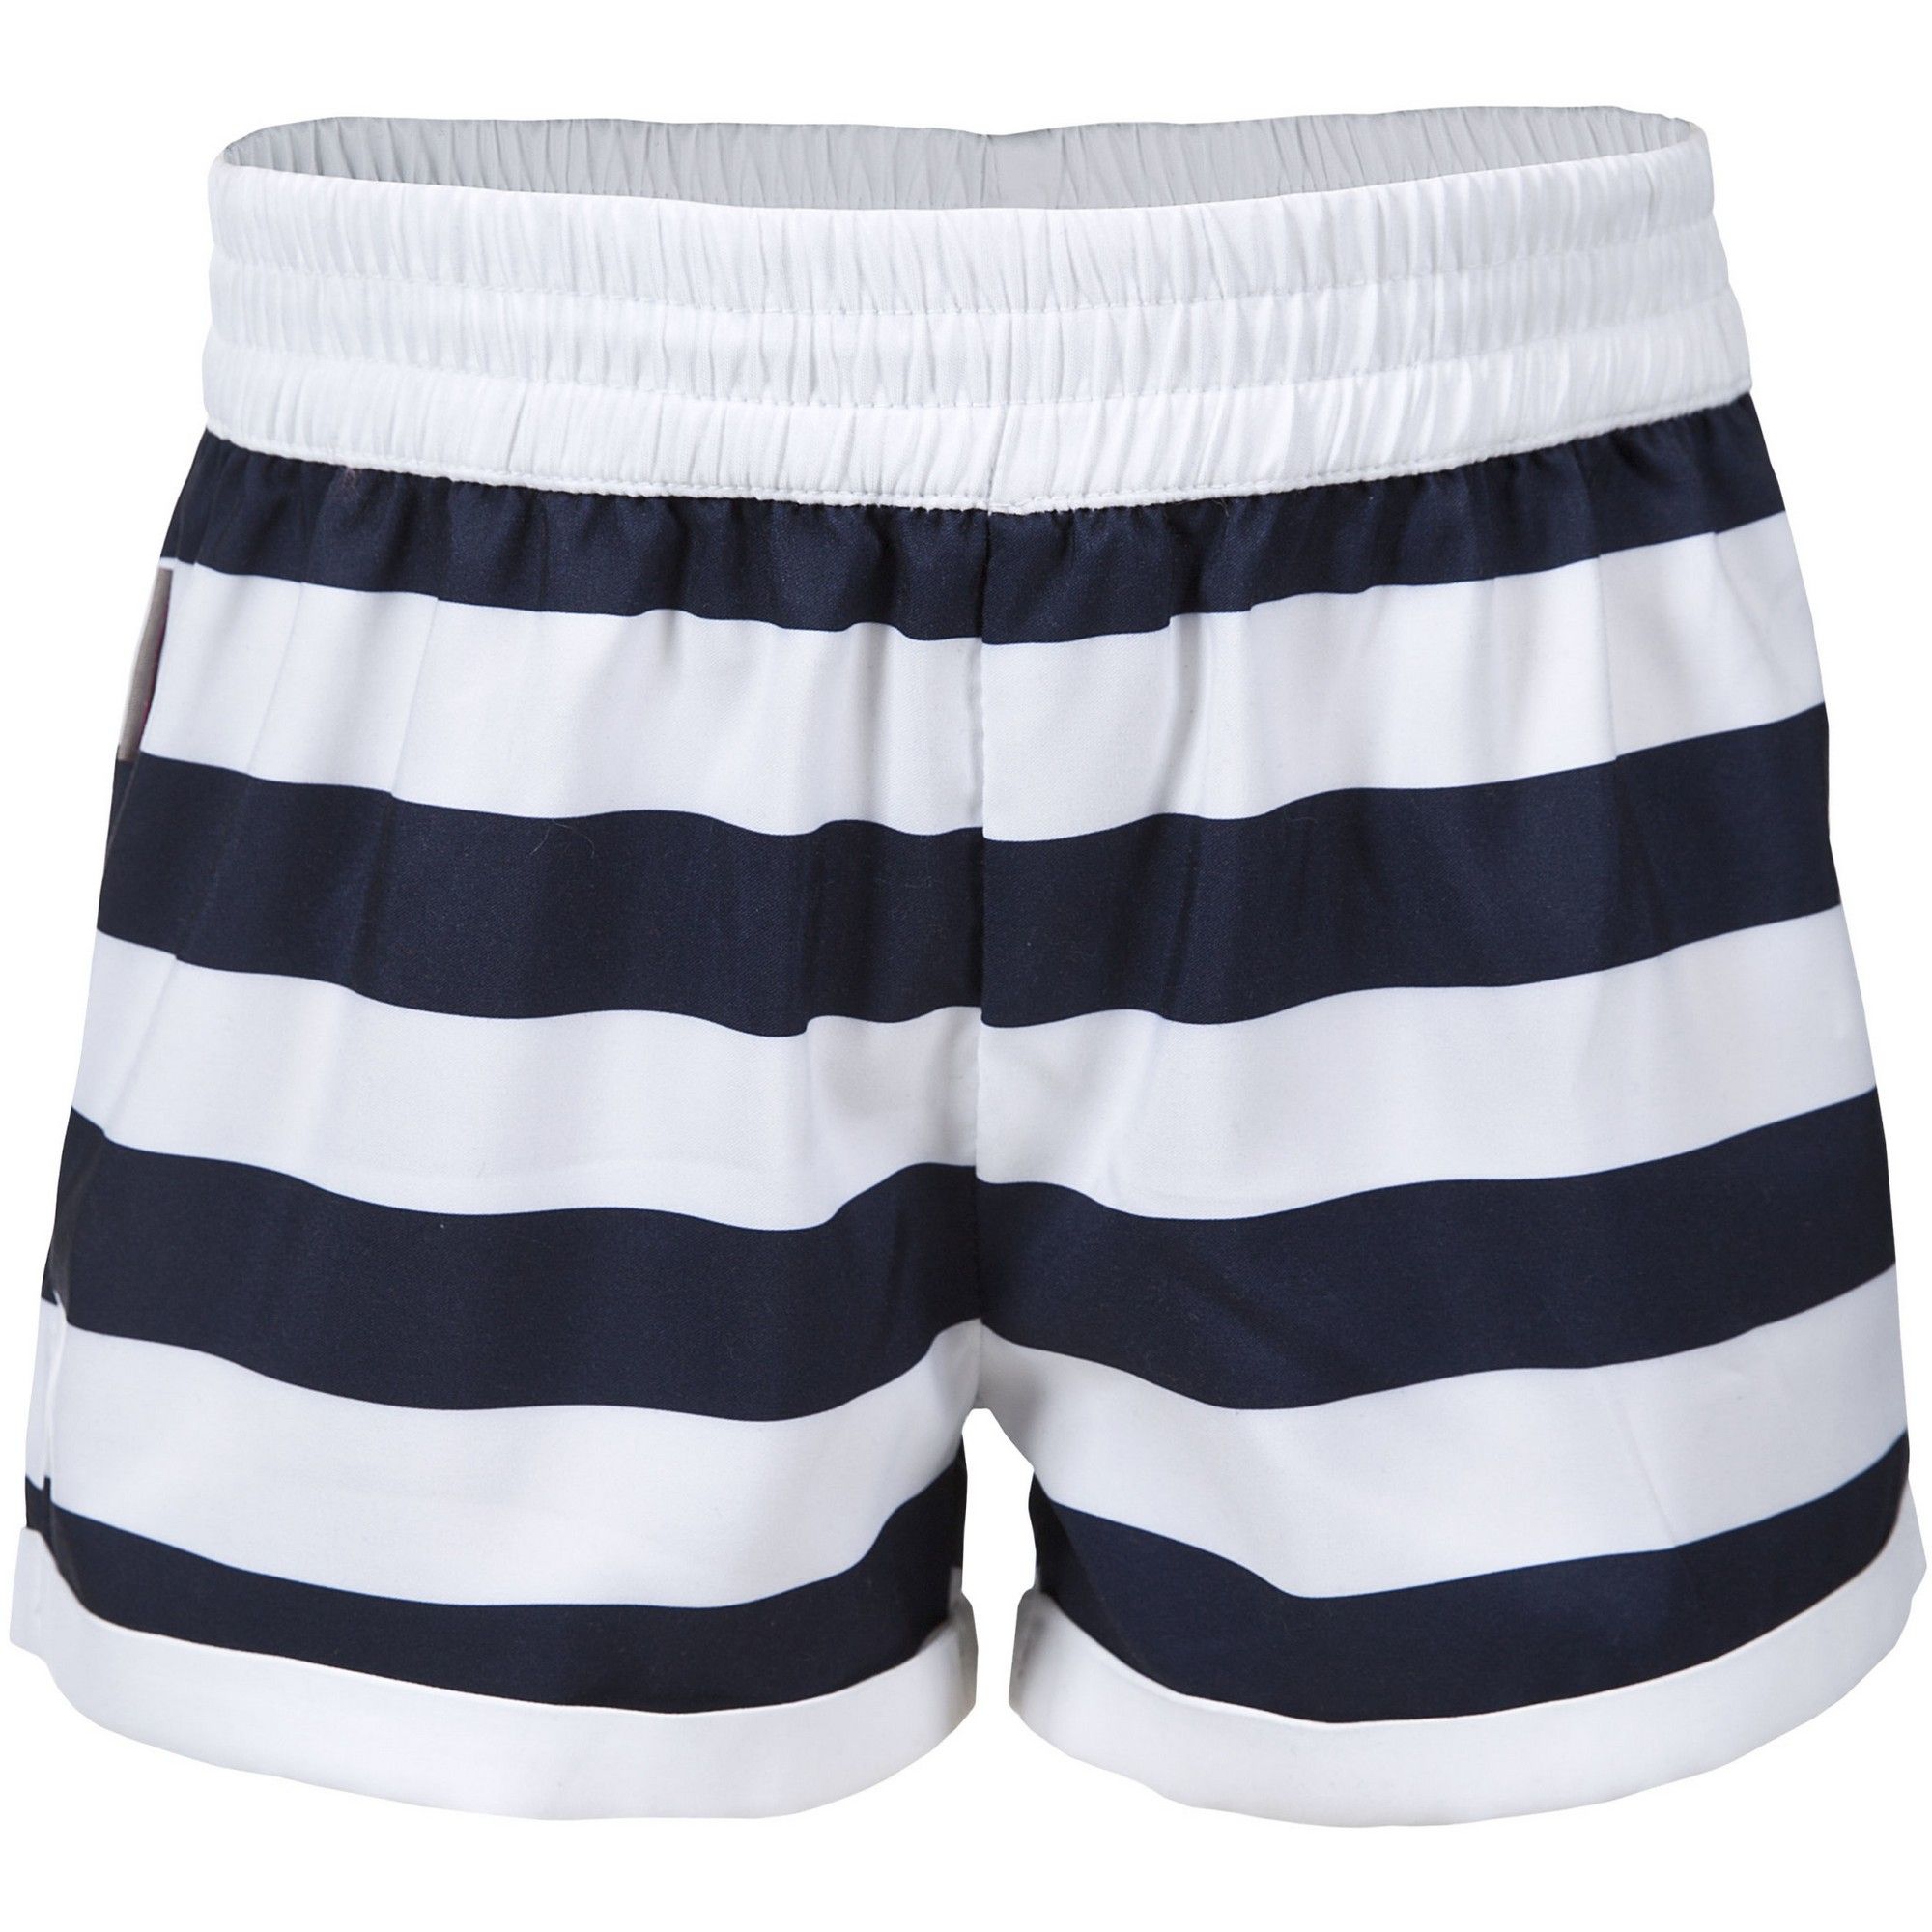 Girls short length shorts. Elasticated waistband. Mock tie detail at waist. 100% Polyester. Trespass Childrens Waist Sizing (approx): 2/3 Years - 20in/50.5cm, 3/4 Years - 21in/53cm, 5/6 Years - 22in/56cm, 7/8 Years - 23in/58.5cm, 9/10 Years - 24in/61cm, 11/12 Years - 26in/66cm.